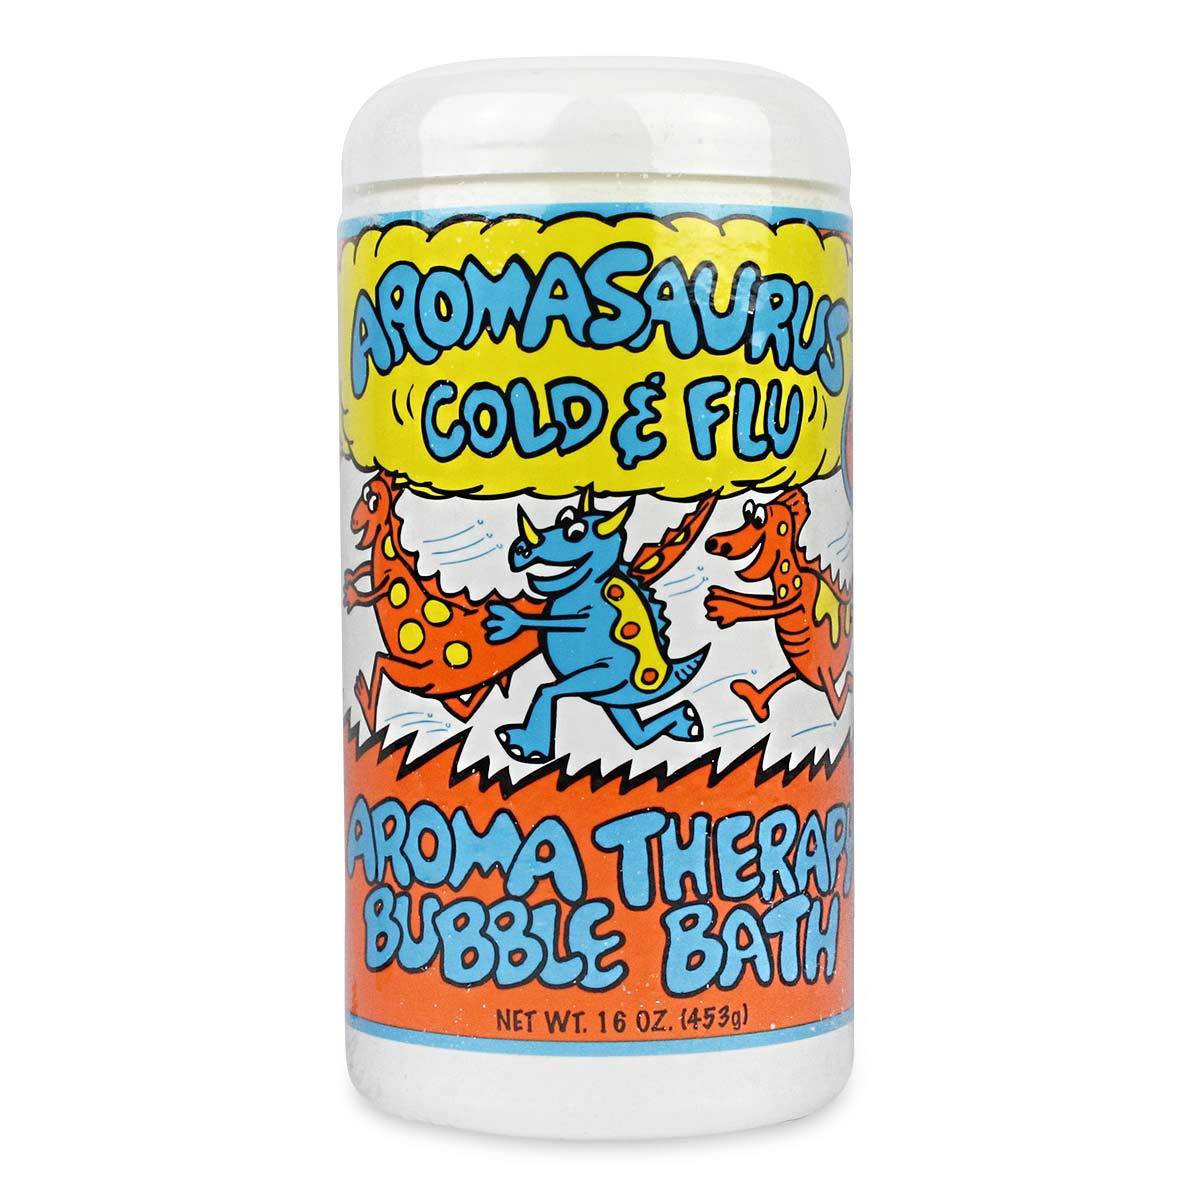 Primary image of Aromasaurus Rex Cold and Flu Bath for Children